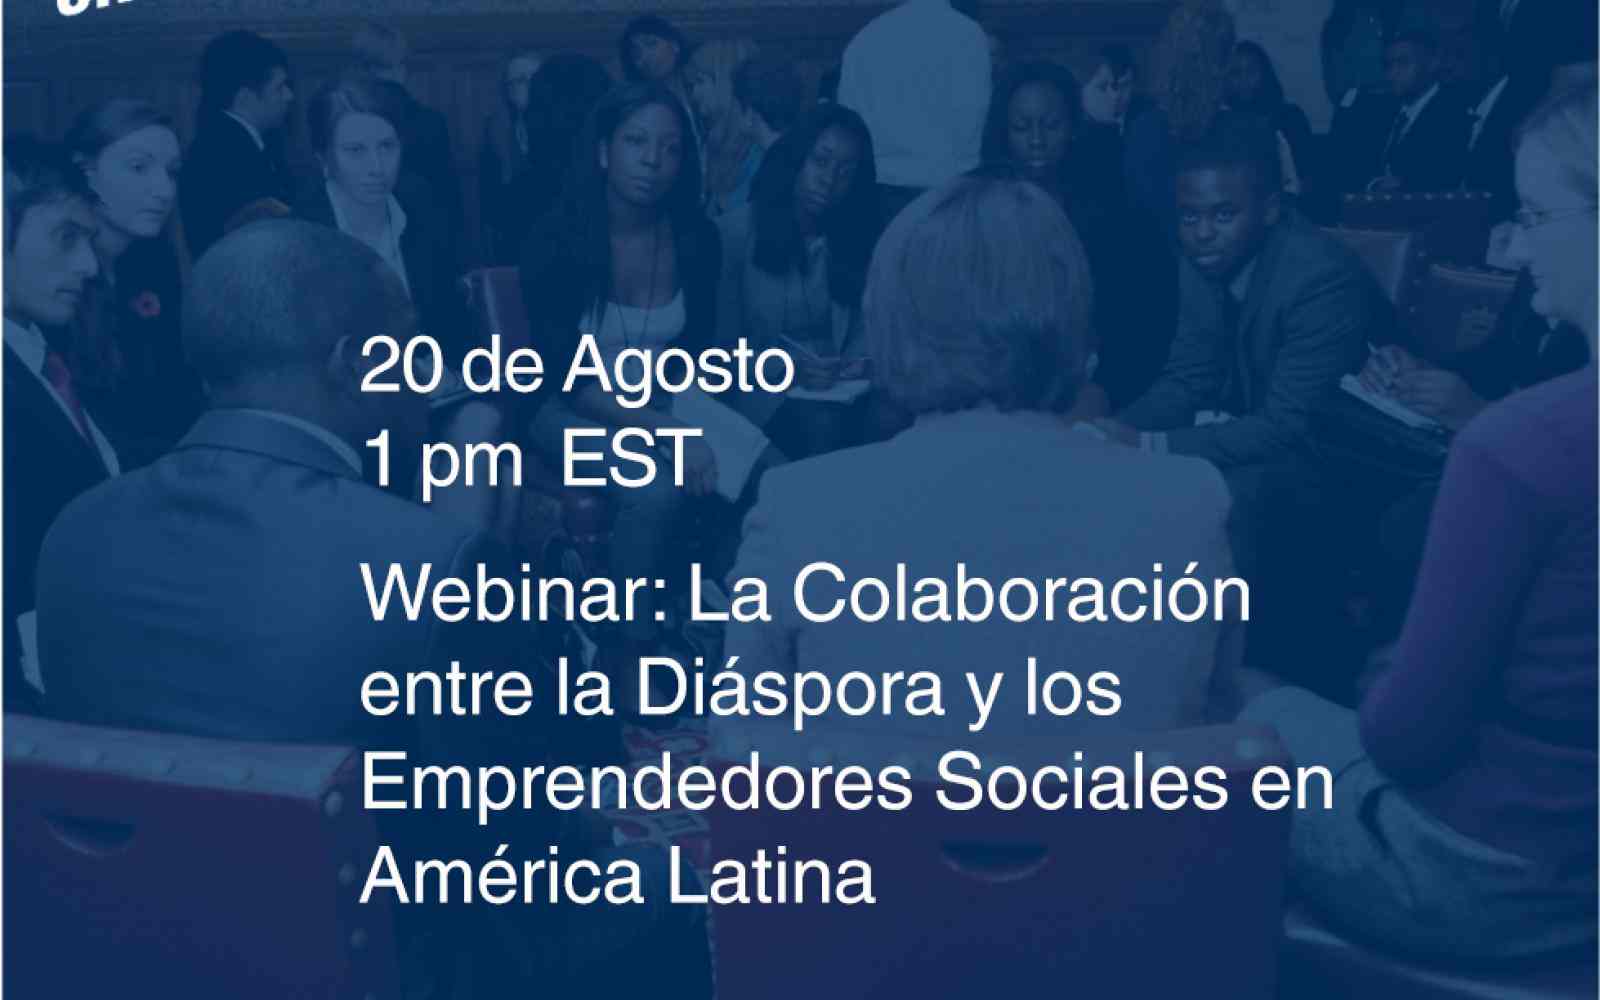 A flyer indicating the date and time of the webinar: 20 de Agosto at 1PM EST and the title of the Webinar: La Colaboración entre Emprendedores Sociales en América Latina y la Diáspora.  The top features the logos of Changemakers Unidos and Ashoka Diaspora Networks.  The IOM and iDiaspora logos are placed at the bottom.